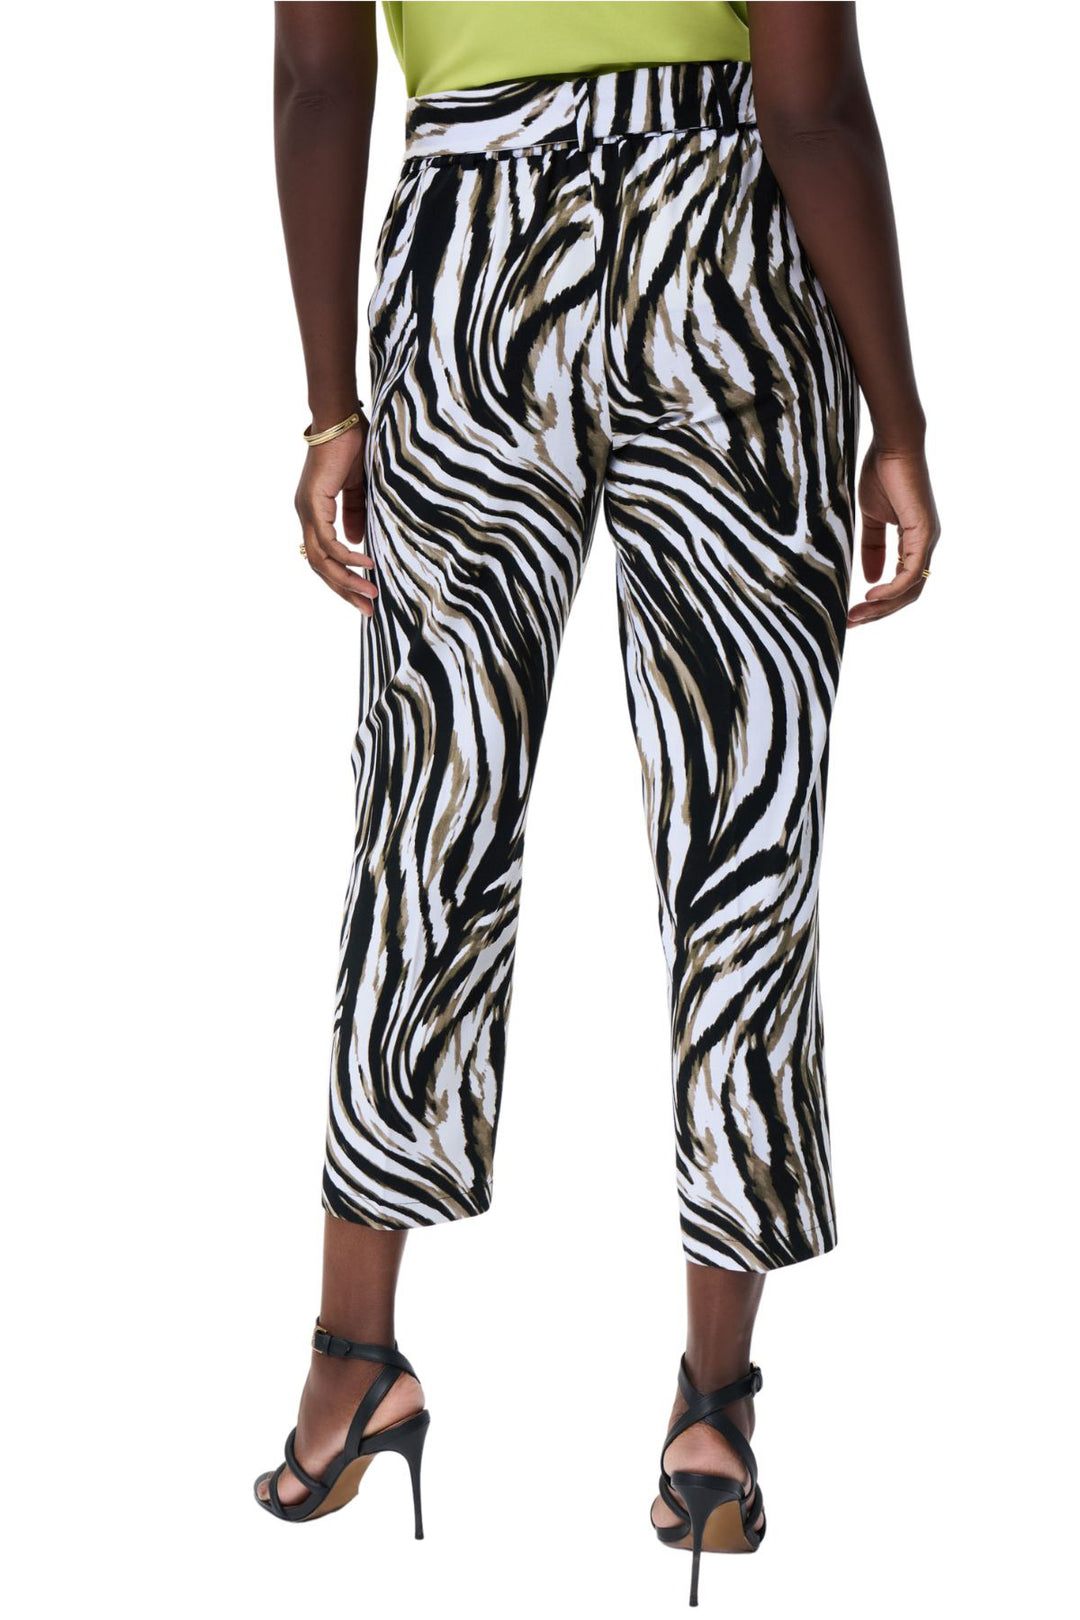 Animal print wide leg pants by Joseph Ribkoff, sold and shipped from Pizazz Boutique Nelson Bay women's dresses online Australia front view